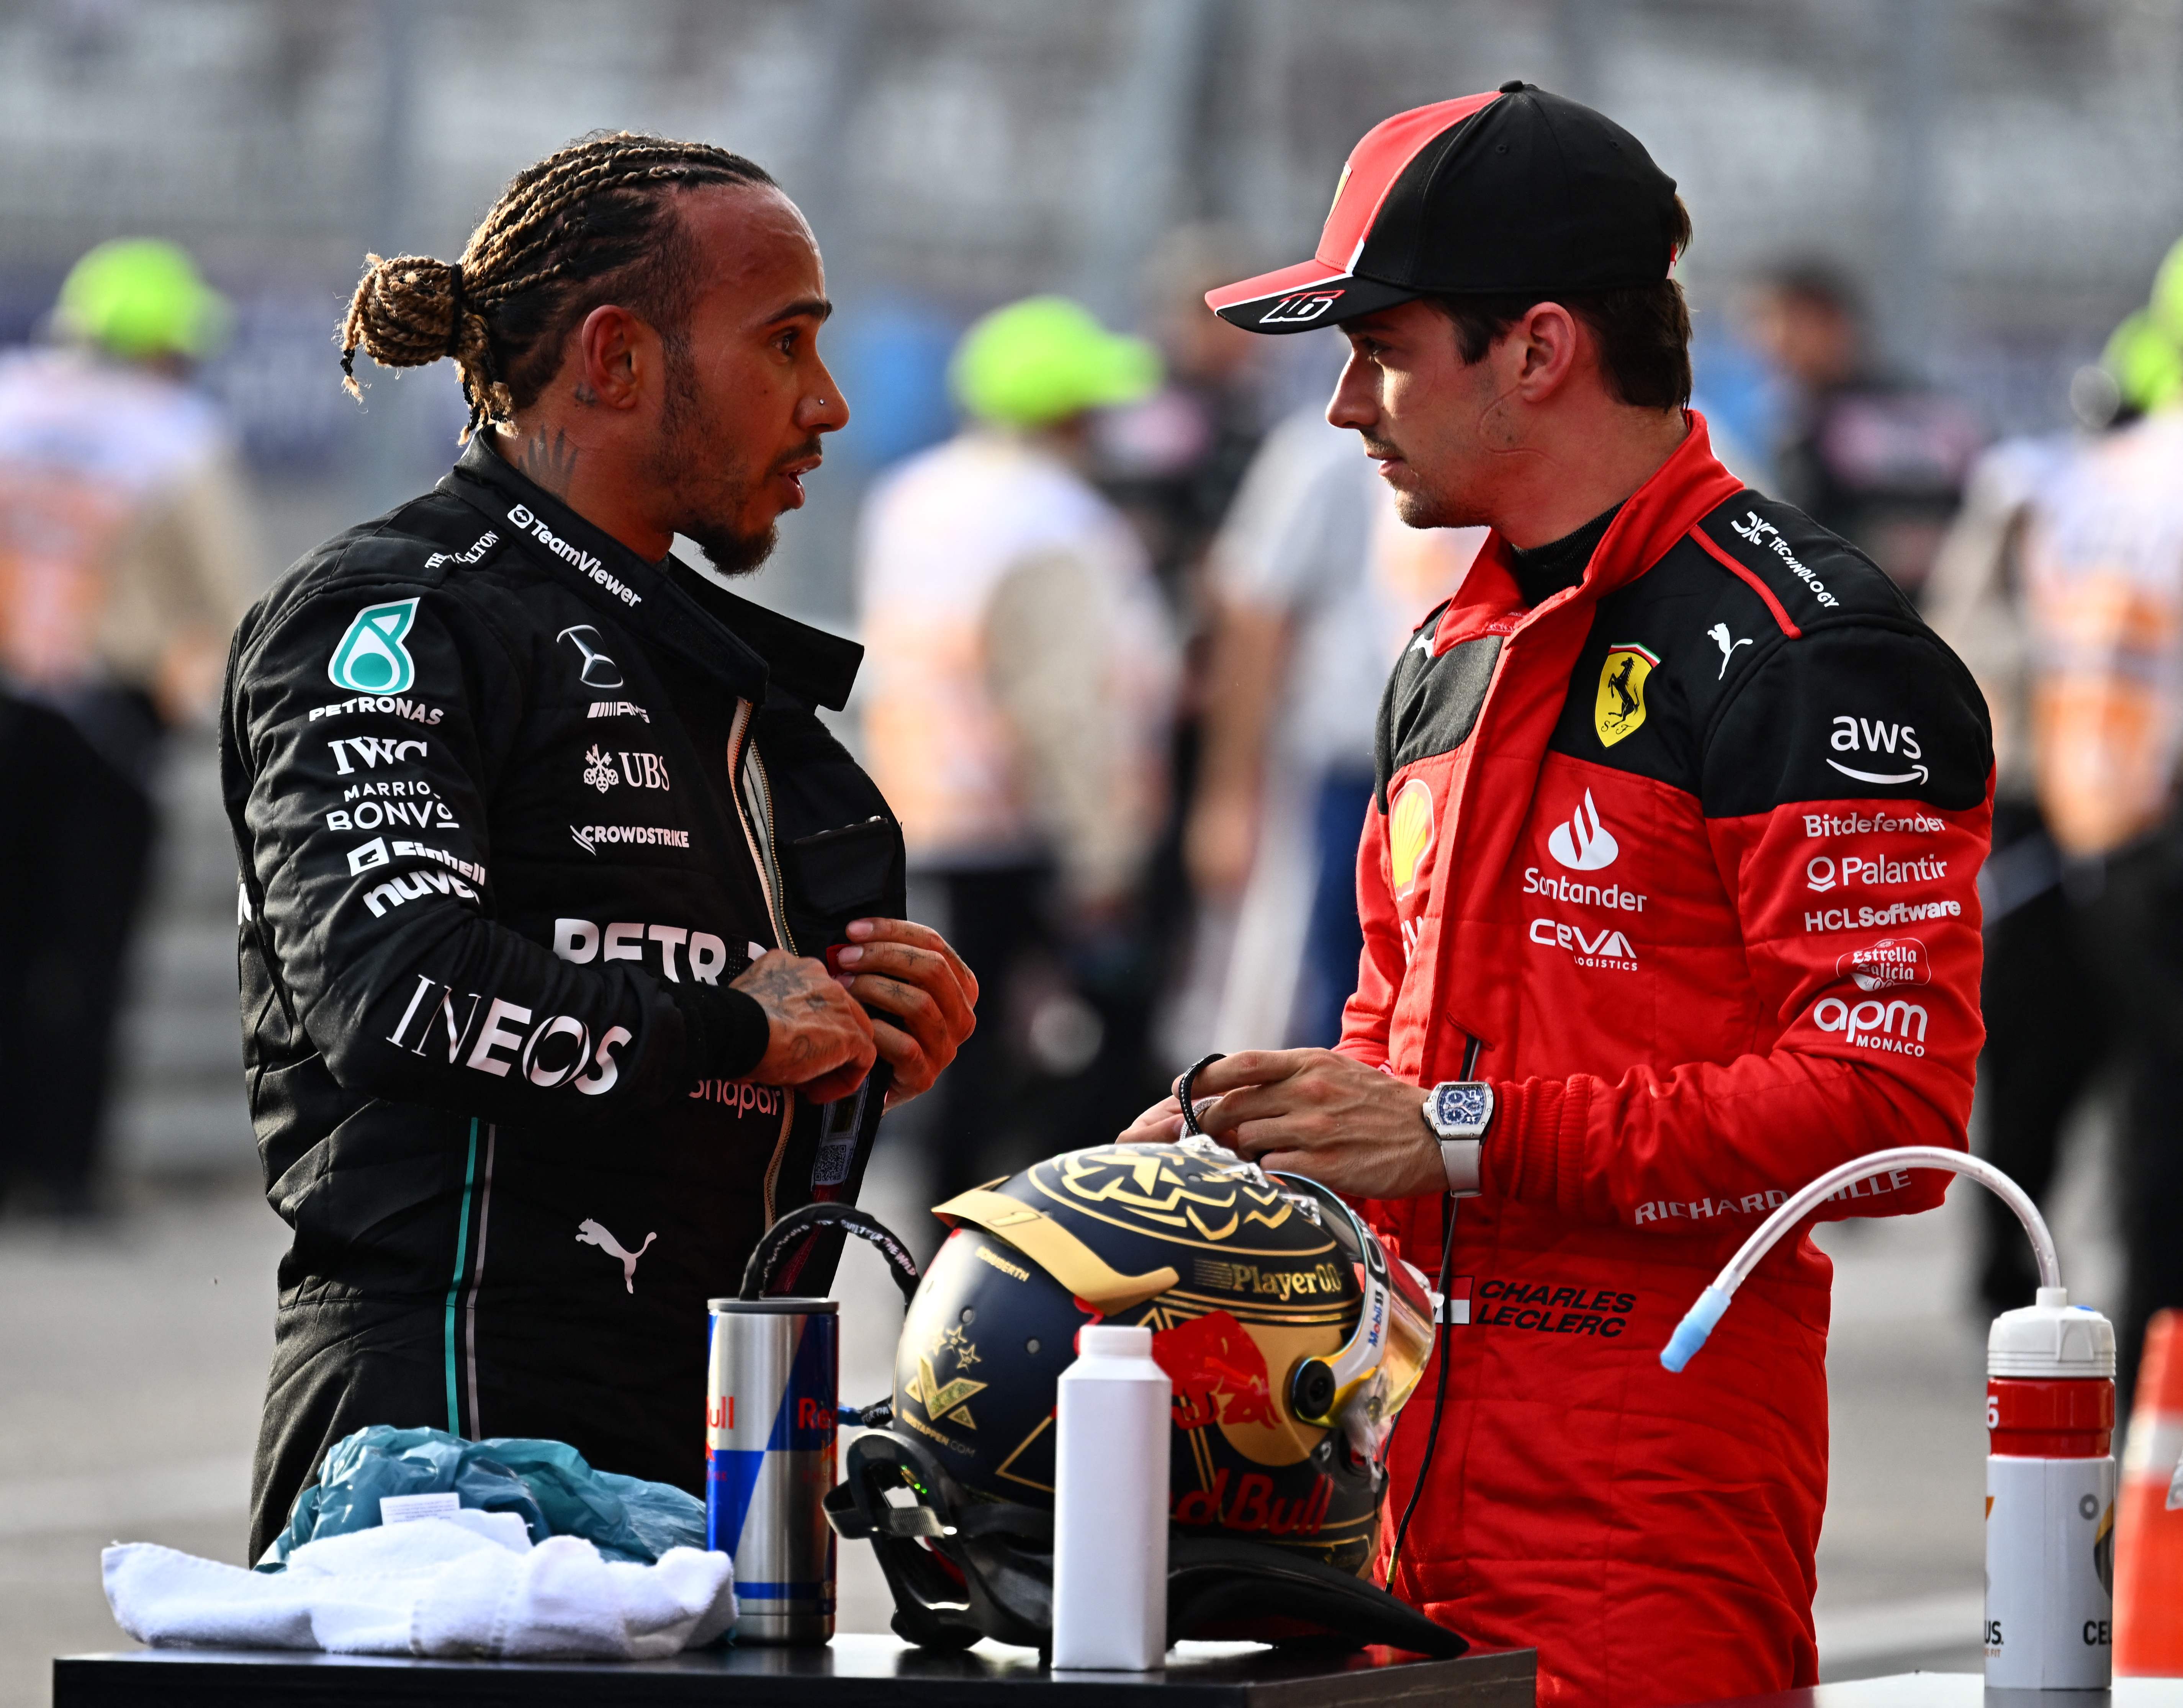 Hamilton and Charles Leclerc were both disqualified from Sunday’s race